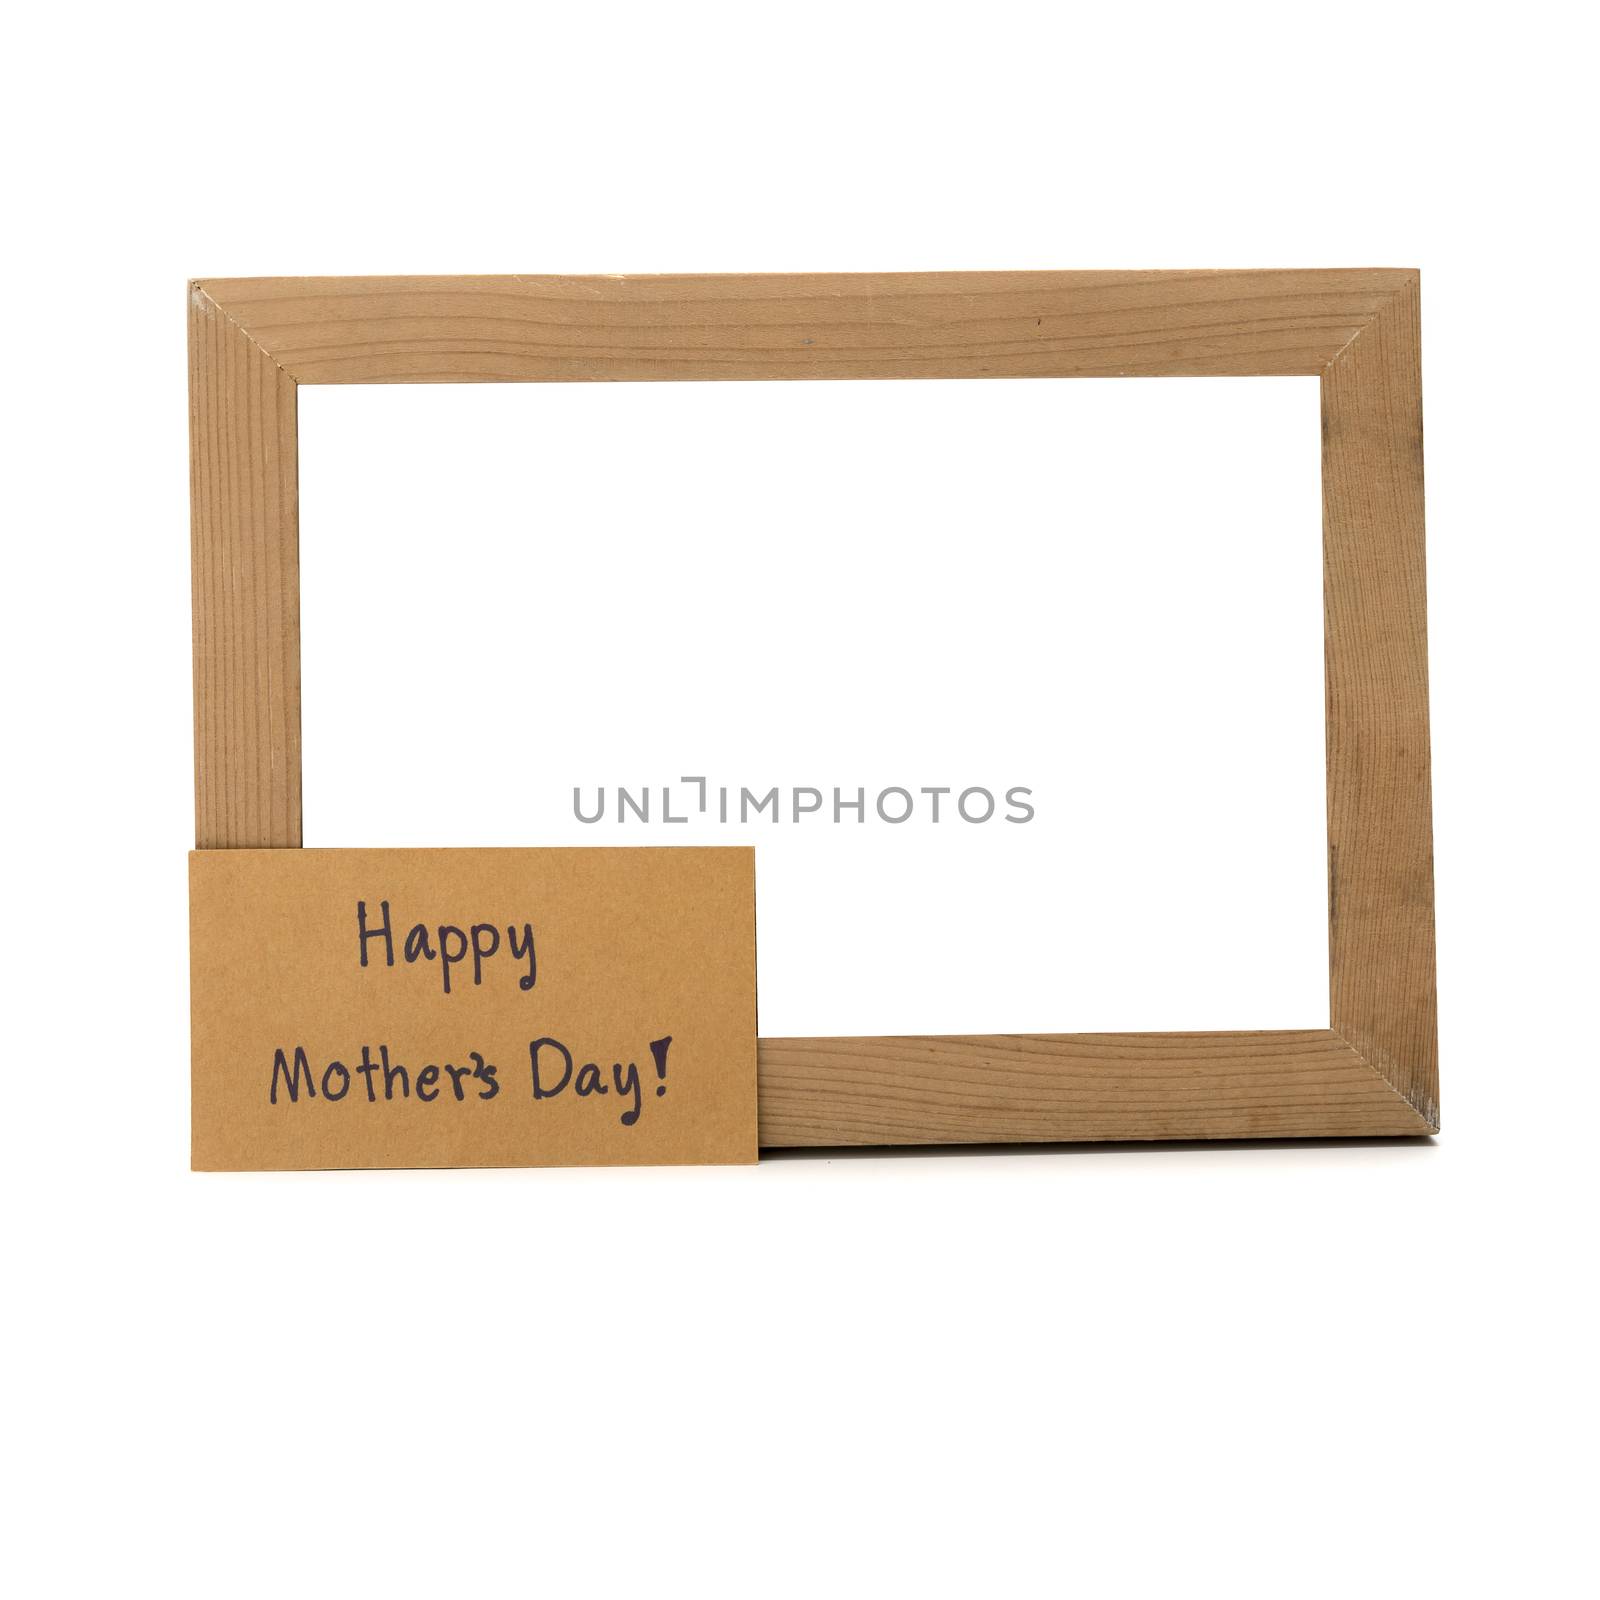 happy mother's day card and photo frame by ammza12